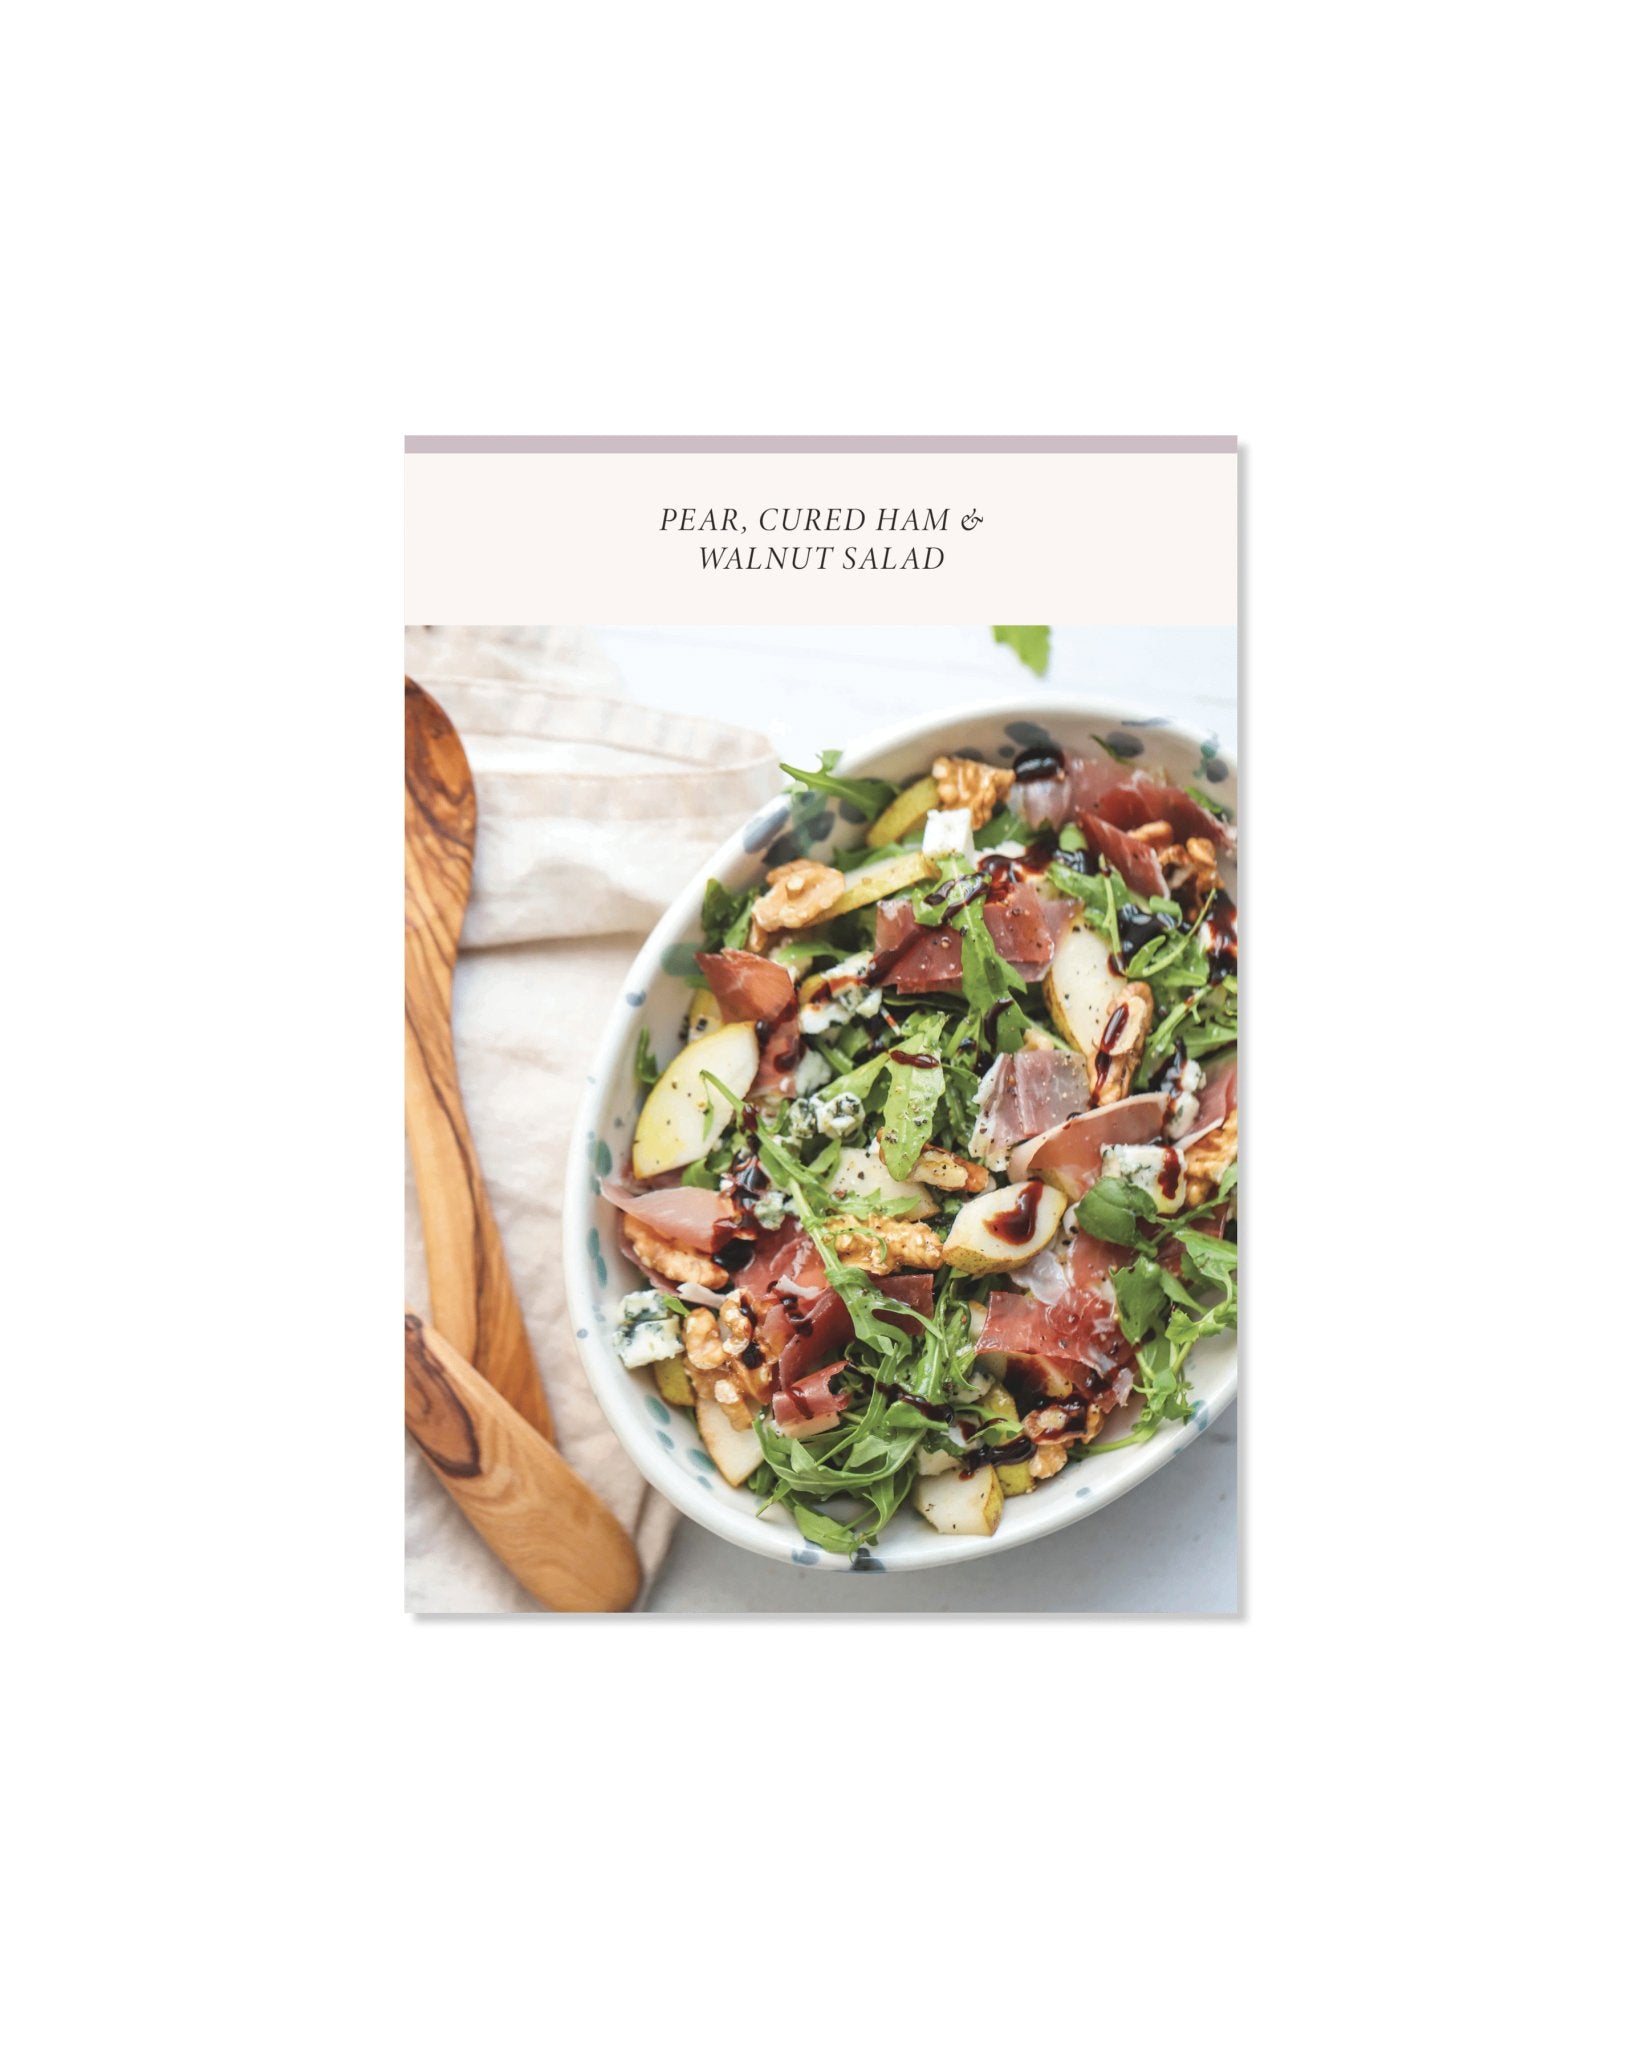 Delicious Bundle: High Protein + Low-Gluten + Vegetarian Recipe Packs - My Store